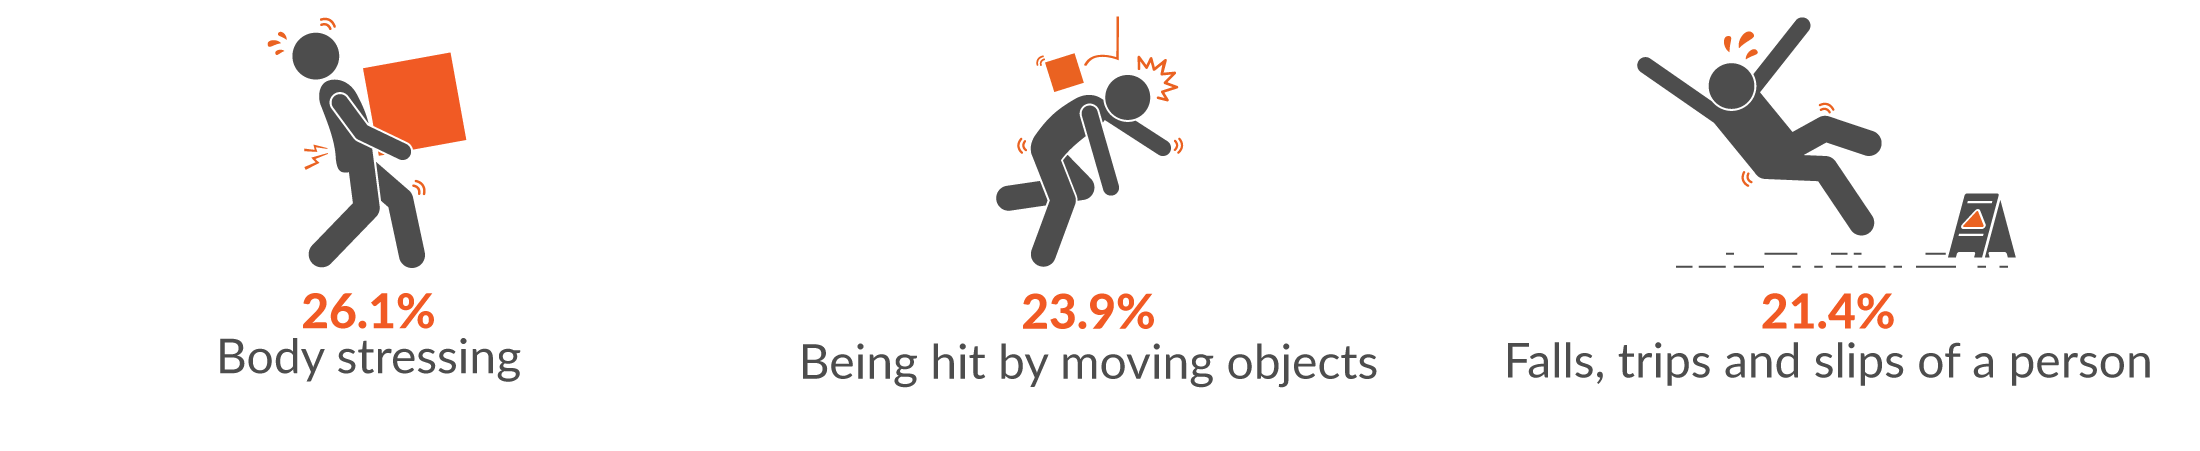 This infographic shows the main three mechanisms for serious injuries were 26.1% body stressing; 23.9% Being hit by moving objects; and 21.4% falls, trips and slips of a person.